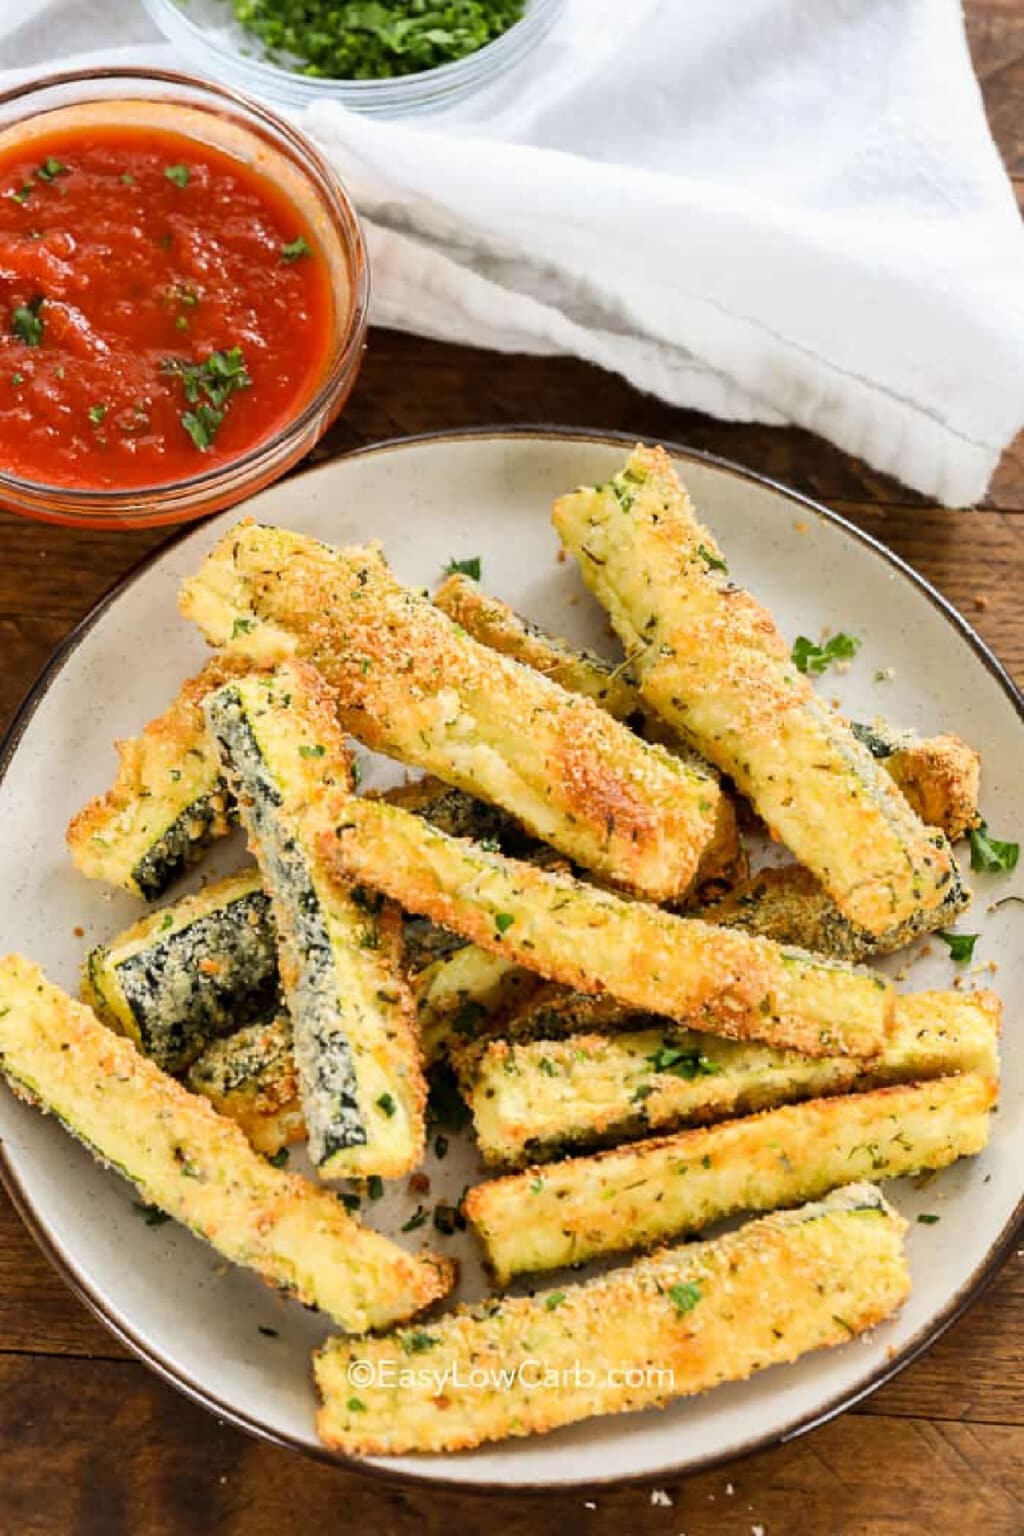 Low Carb (Keto) Zucchini Fries - Easy Low Carb